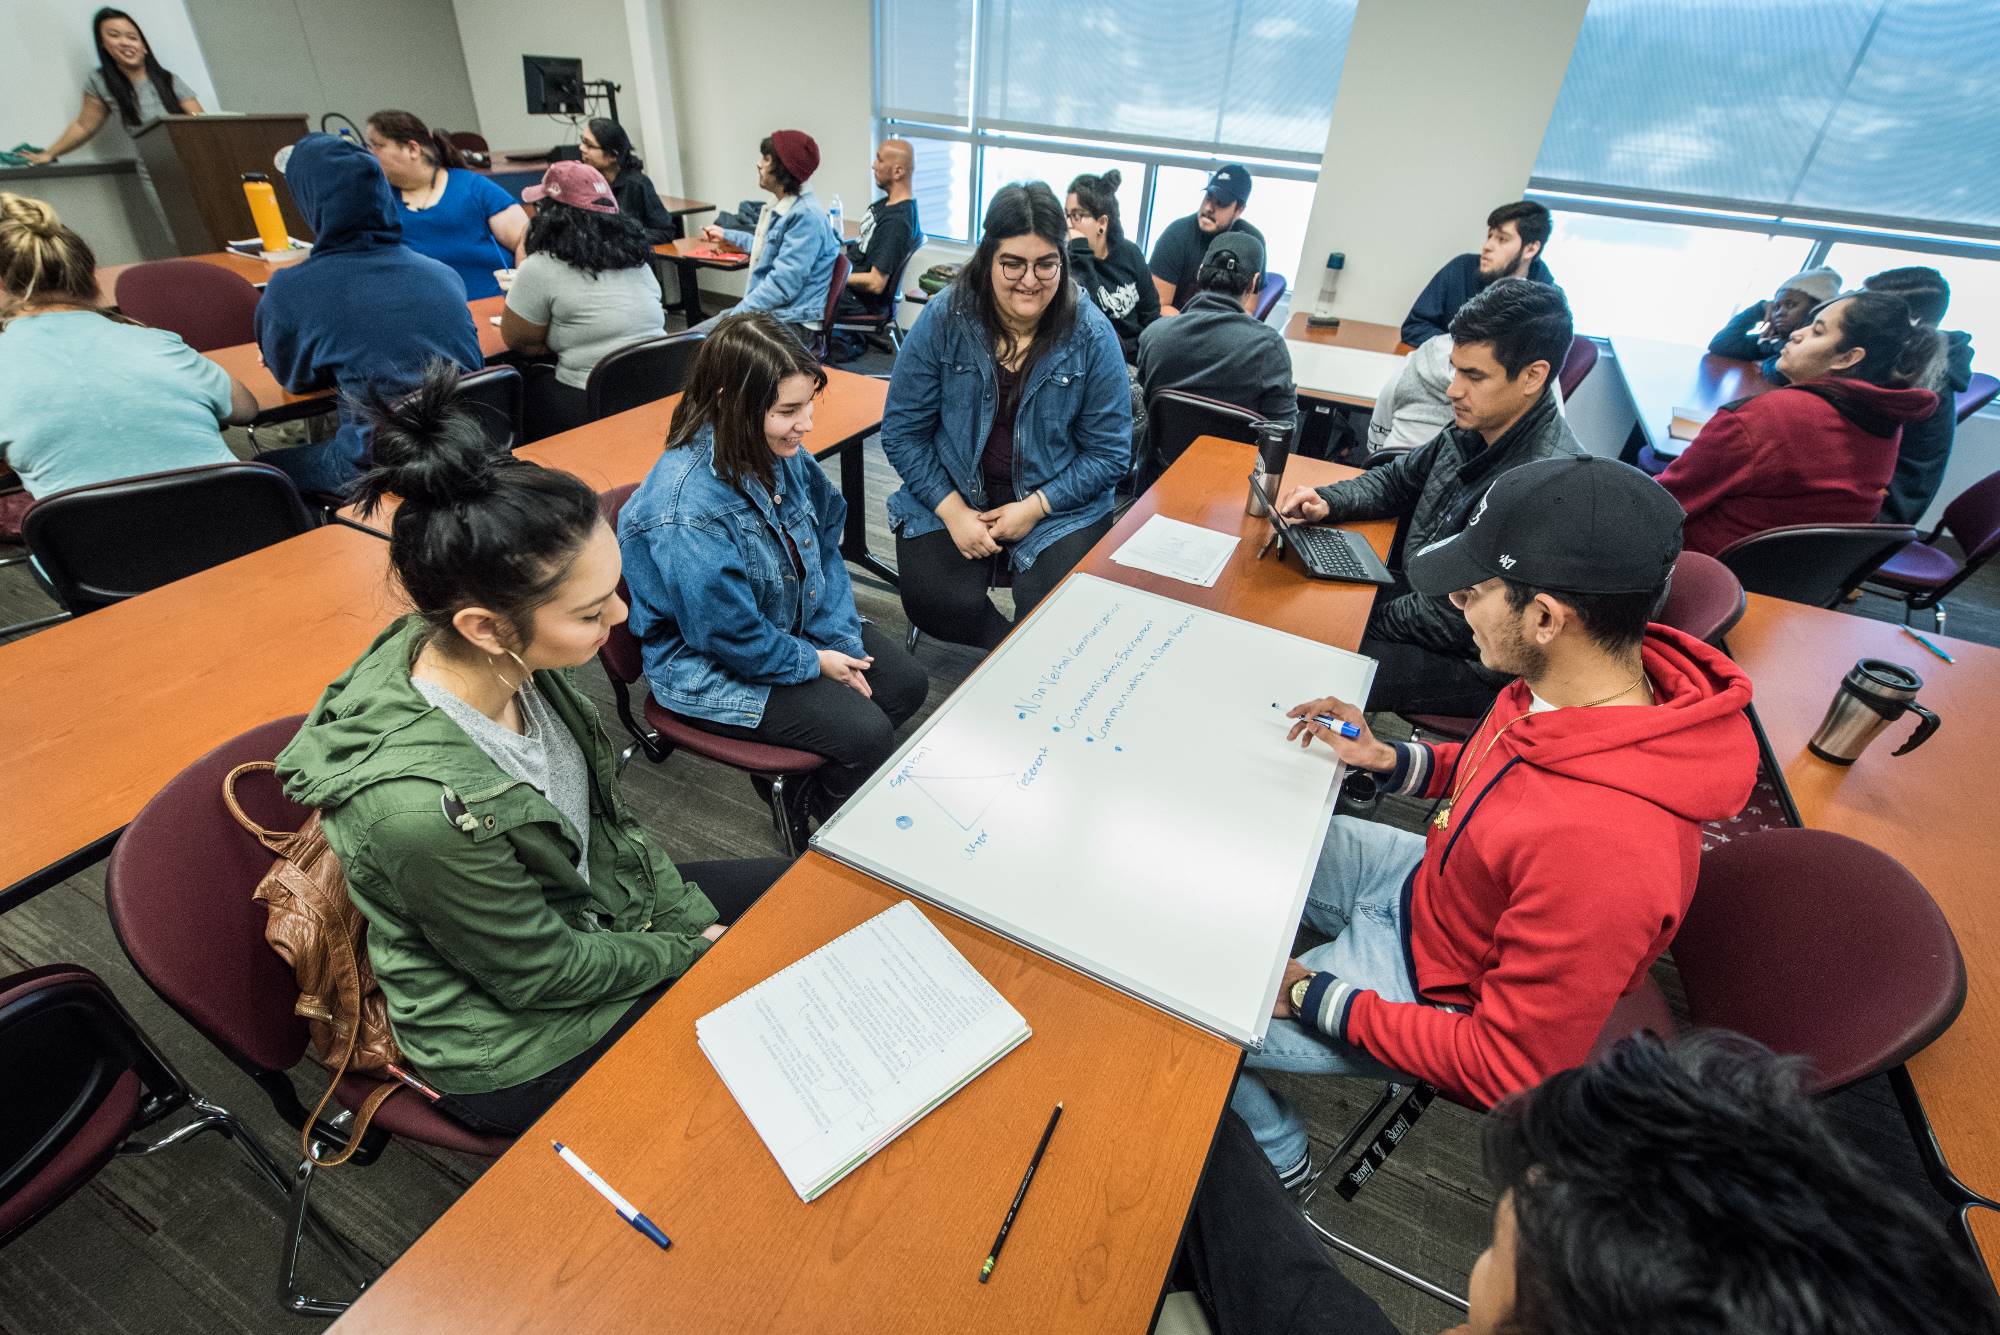 Students in a communication studies class at the Chaffey College Fontana campus work in groups.